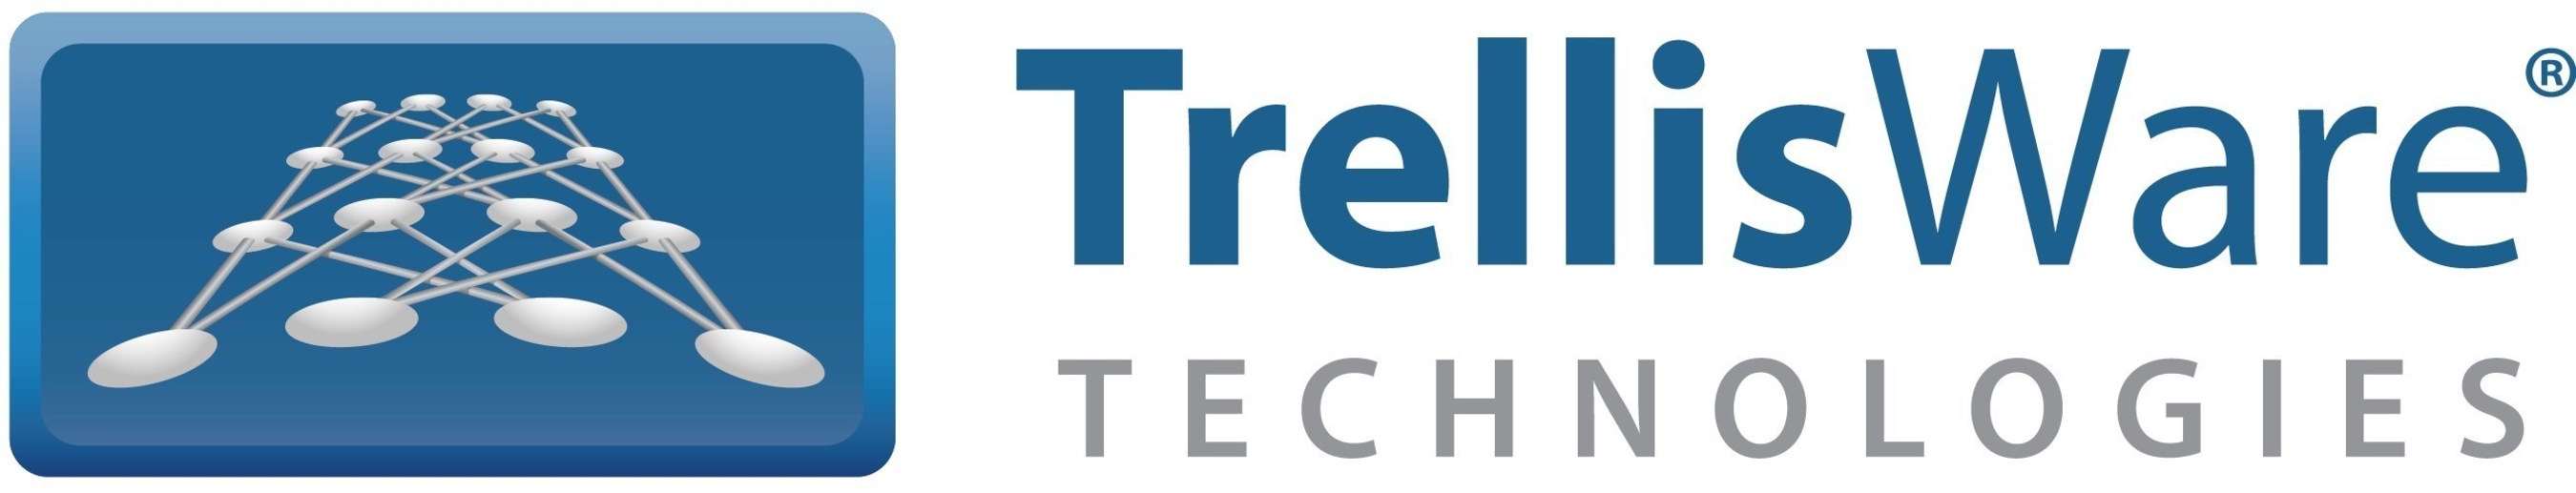 TrellisWare is a global leader in wireless wideband mobile networking. Its technologies include the TSM(TM) networking waveform that is a key component of its Software Defined Radio (SDR) family of products: the TW-400 CUB(TM) ISR radio, TW-225 CheetahNet(R) Mini handheld radio, TW-130 WildCat II(TM) vehicular radio, the TW-600 Ocelot(TM) module for embedded integration, and the small form factor radio, TW-850 TSM Ghost(TM).